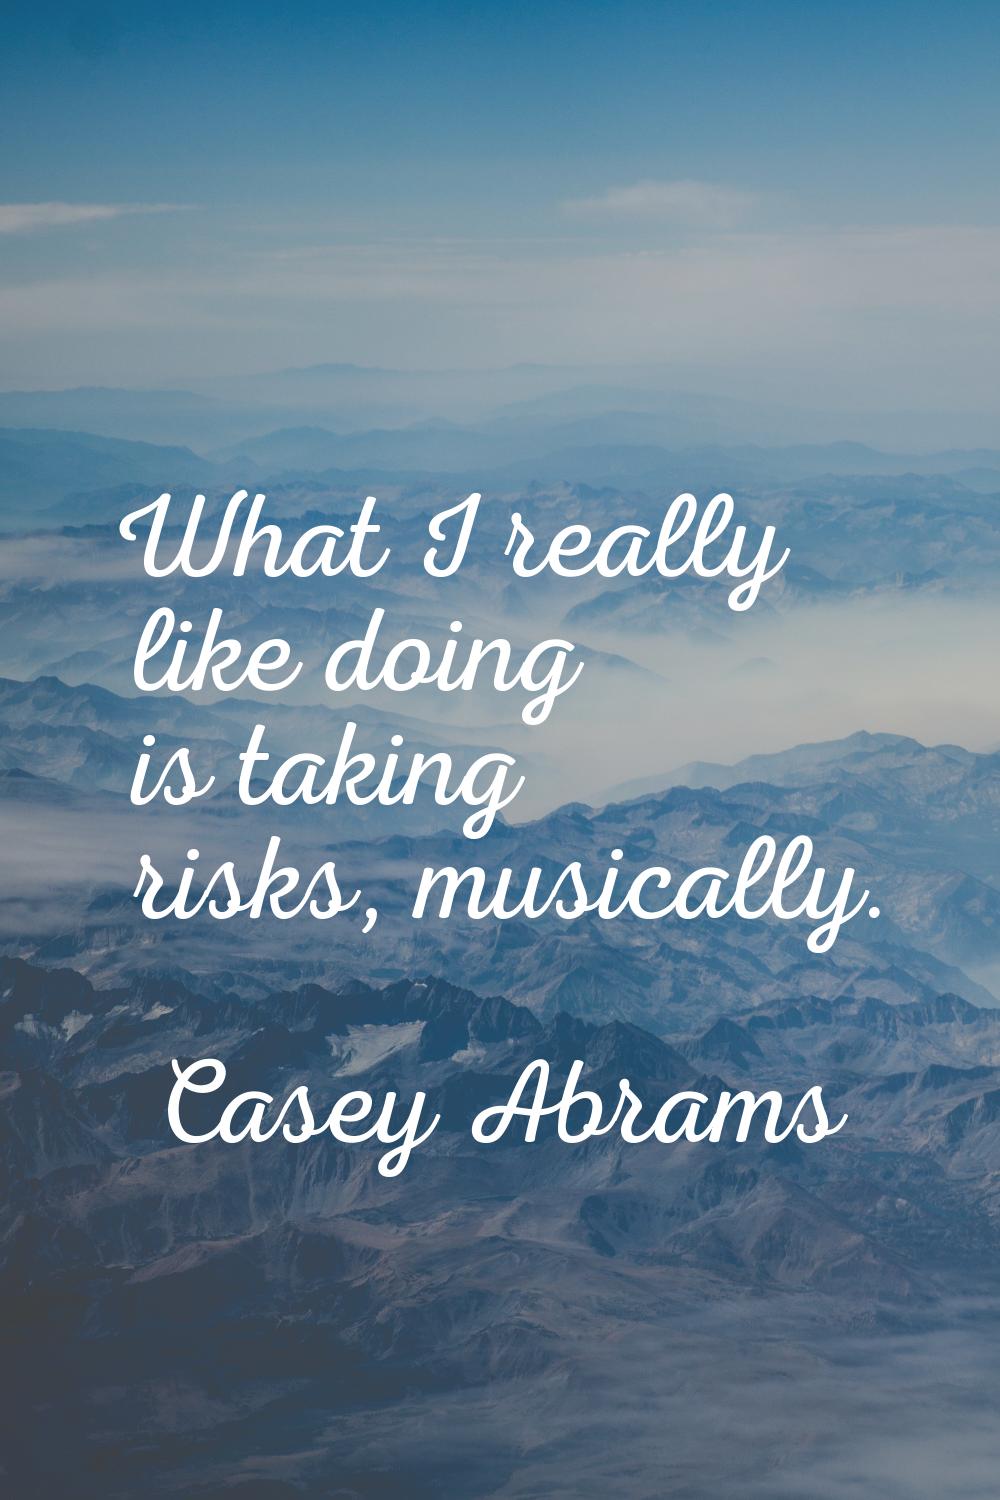 What I really like doing is taking risks, musically.